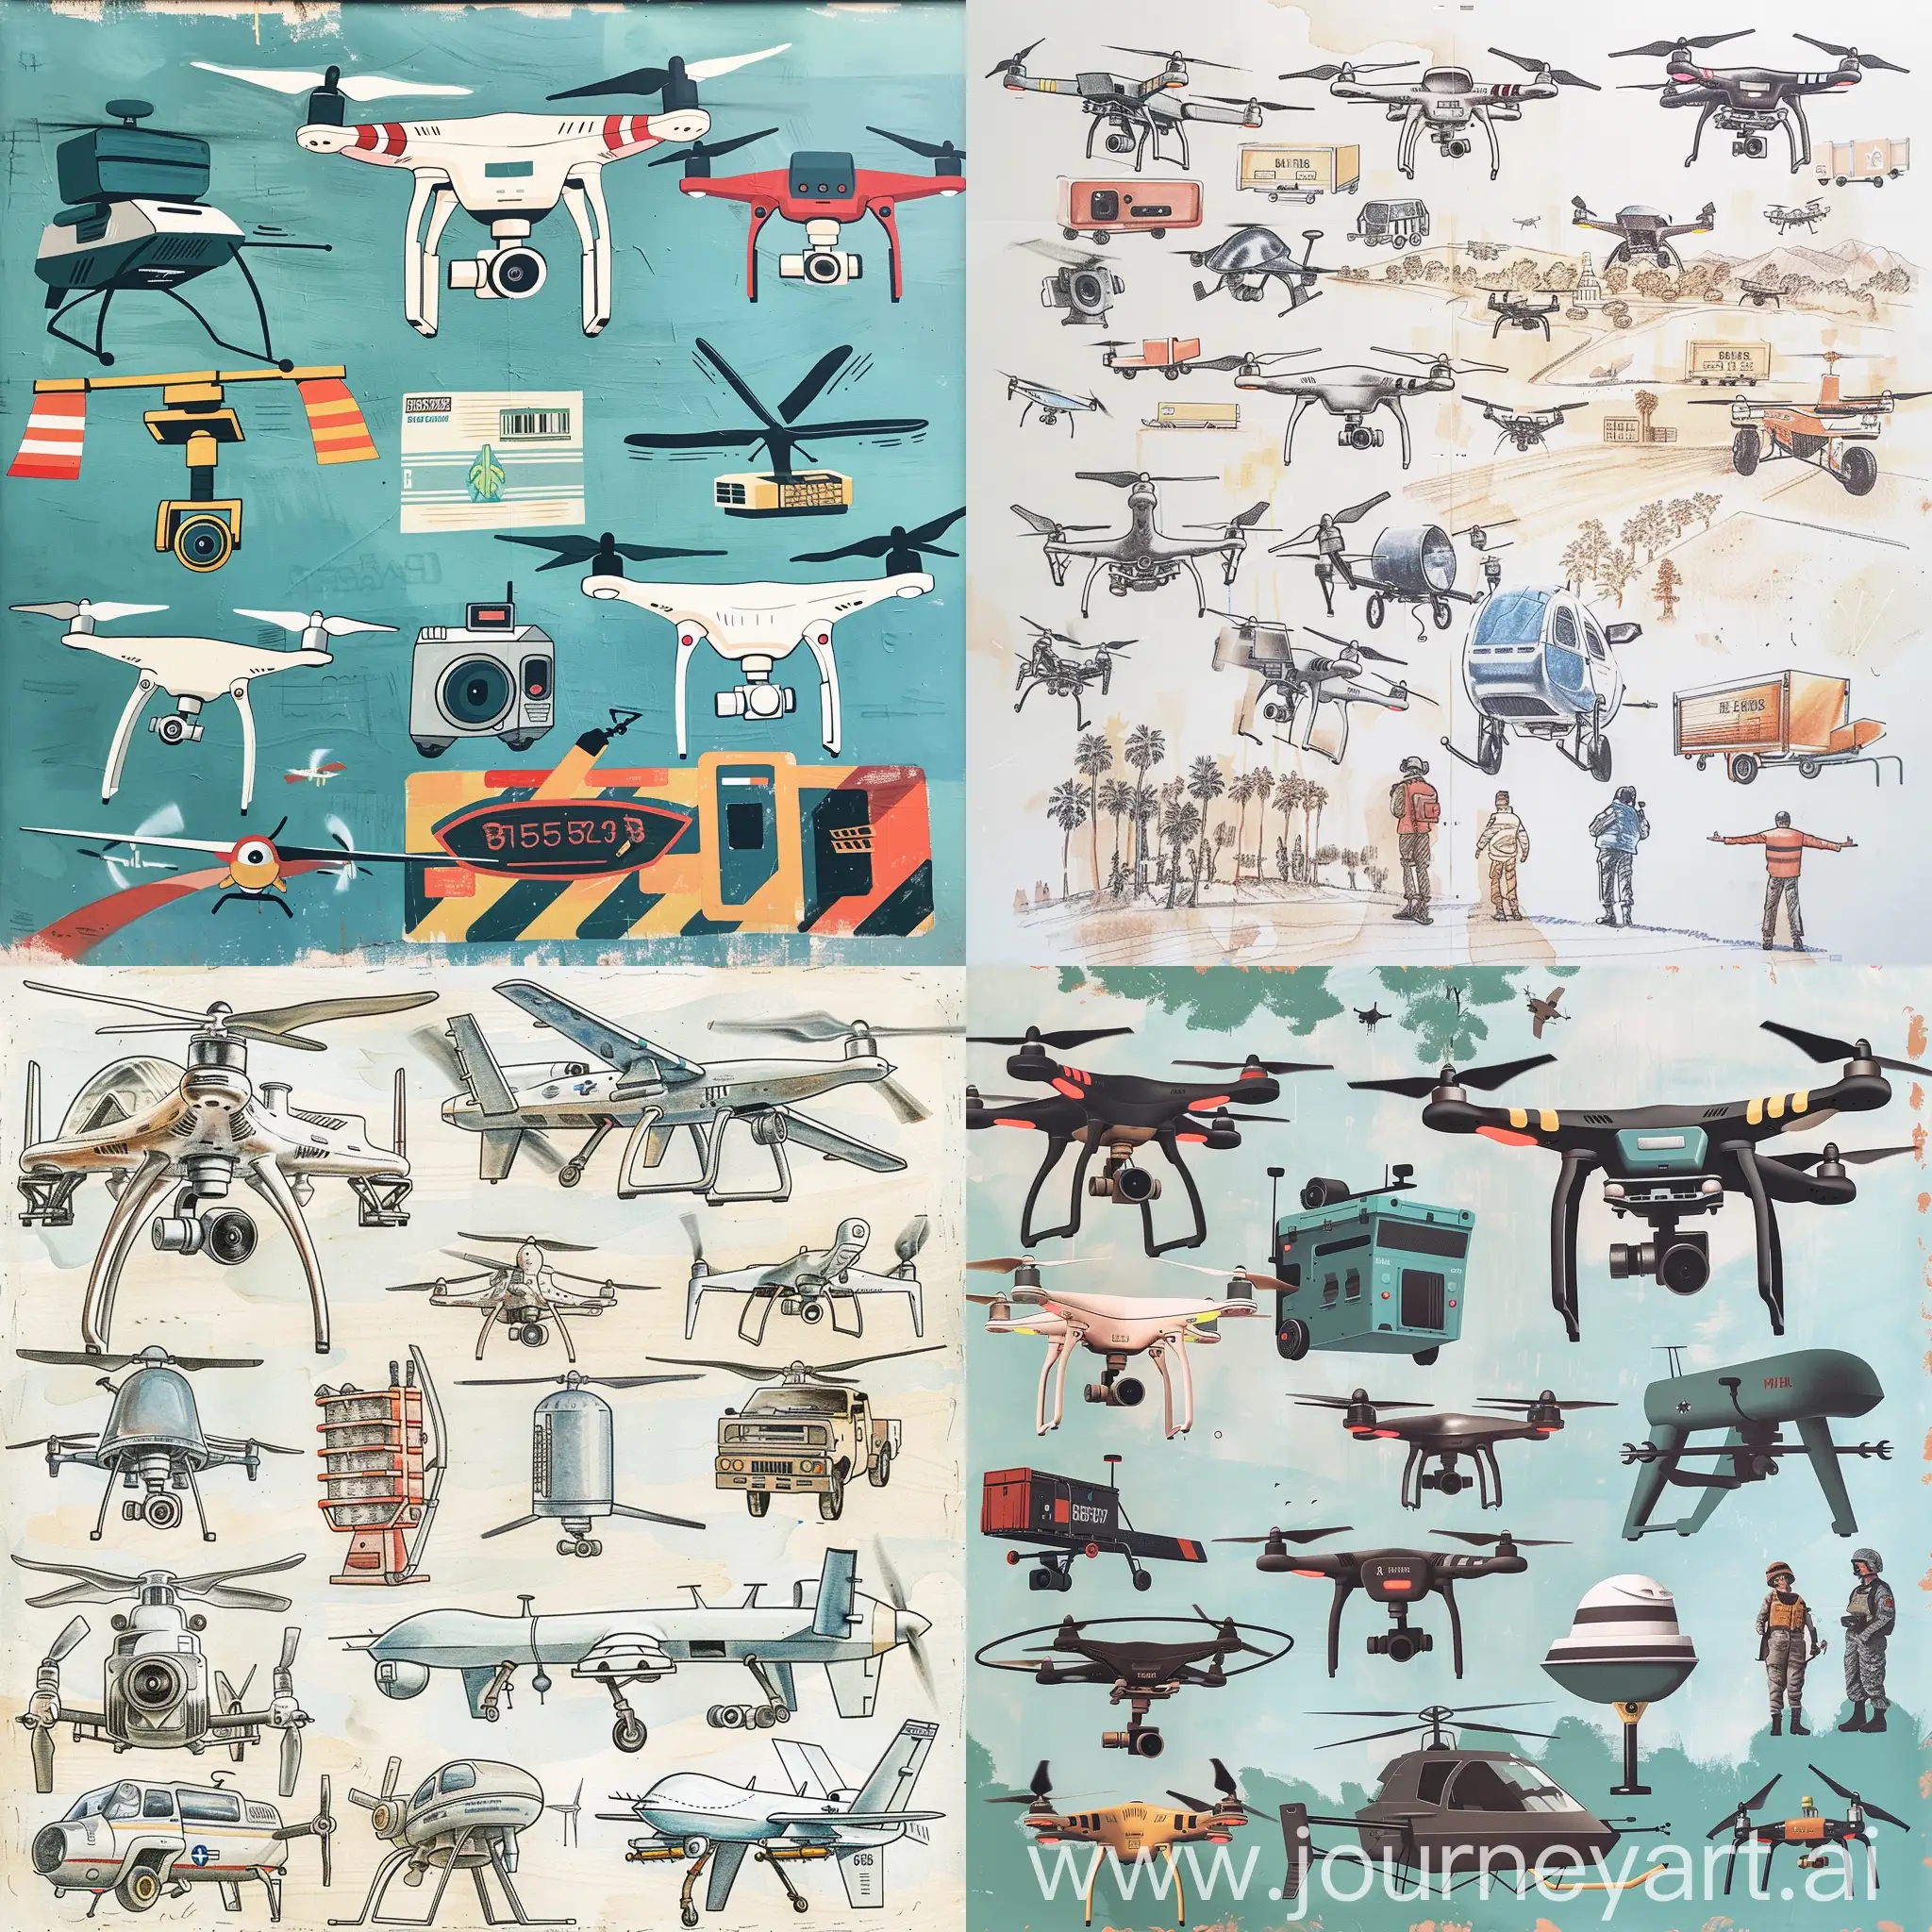 Exploring-Drone-Applications-A-Mural-for-Young-Minds